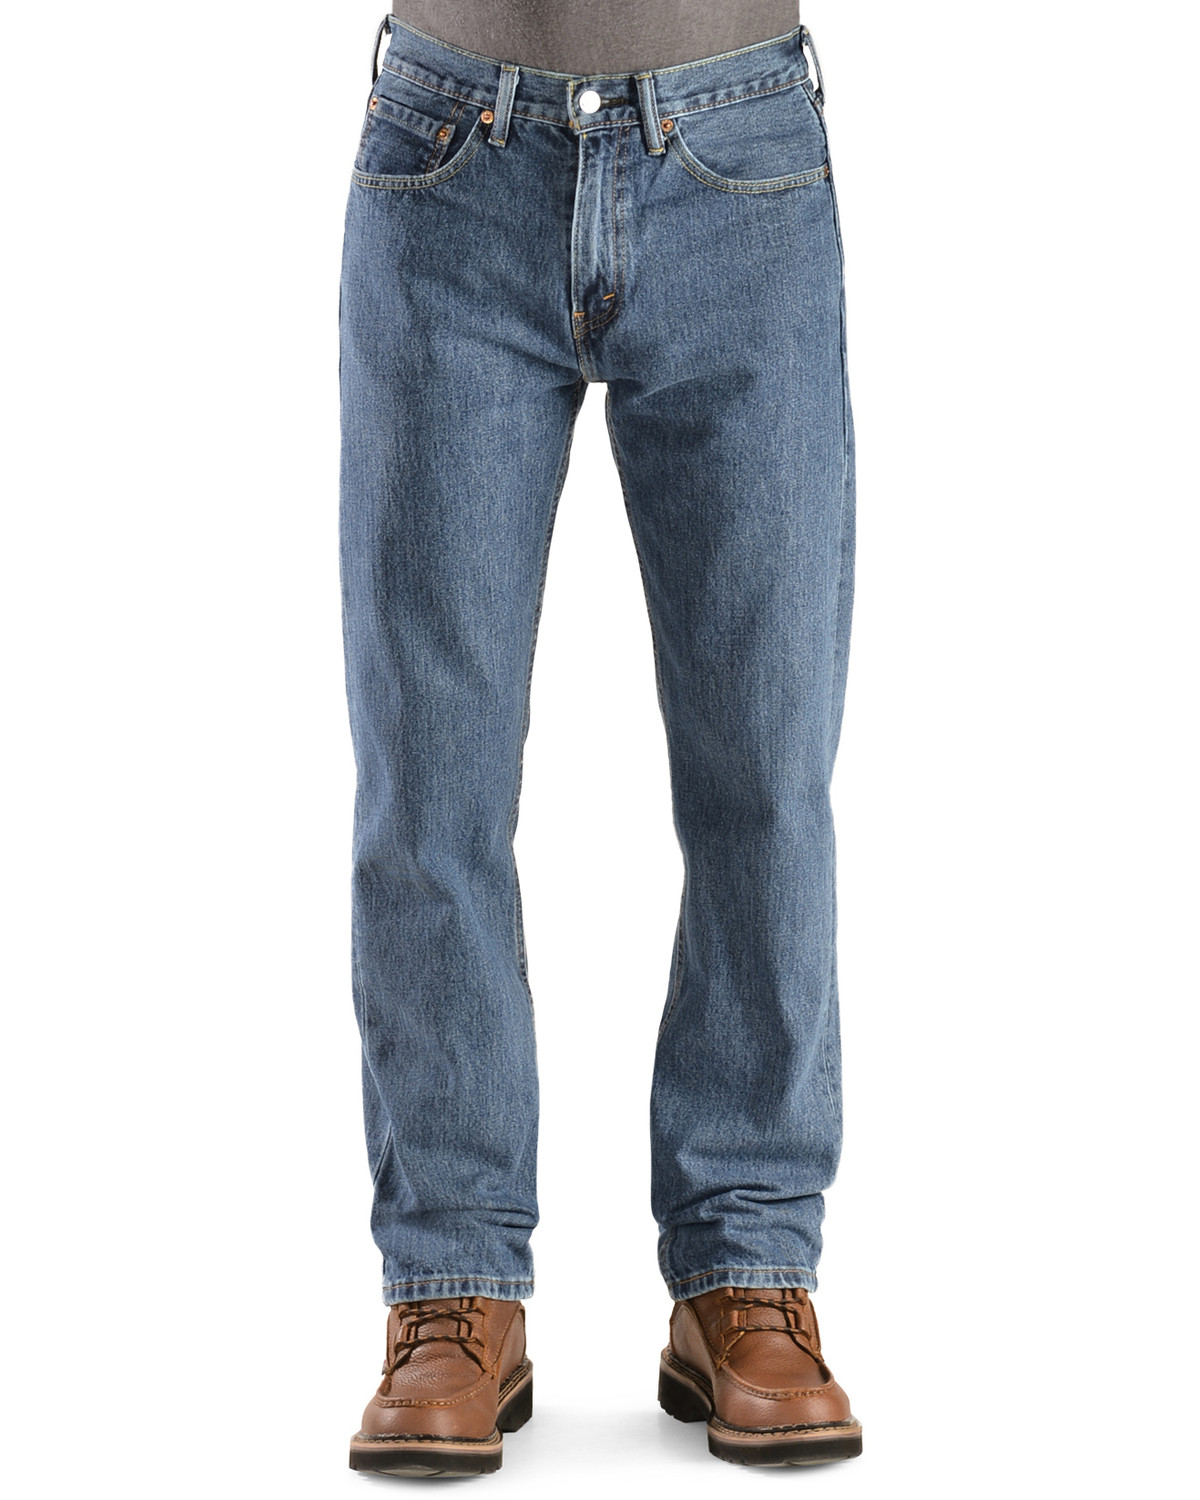 Levi's 505 Jeans - Prewashed Regular Fit - Country Outfitter